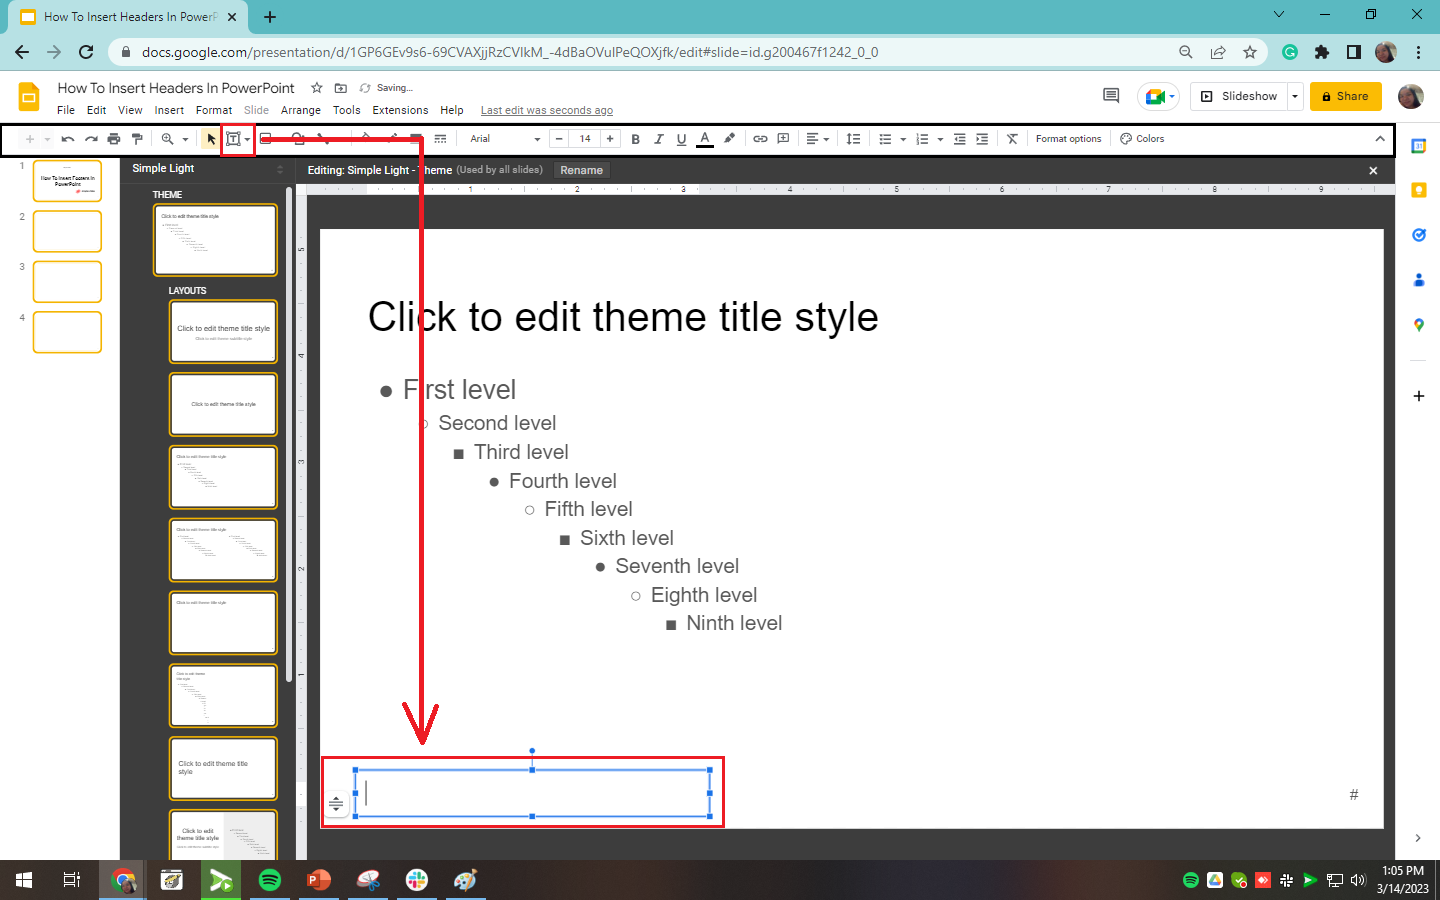 Navigate "text box" in the toolbar section and drag it at the footer in Google Slides.